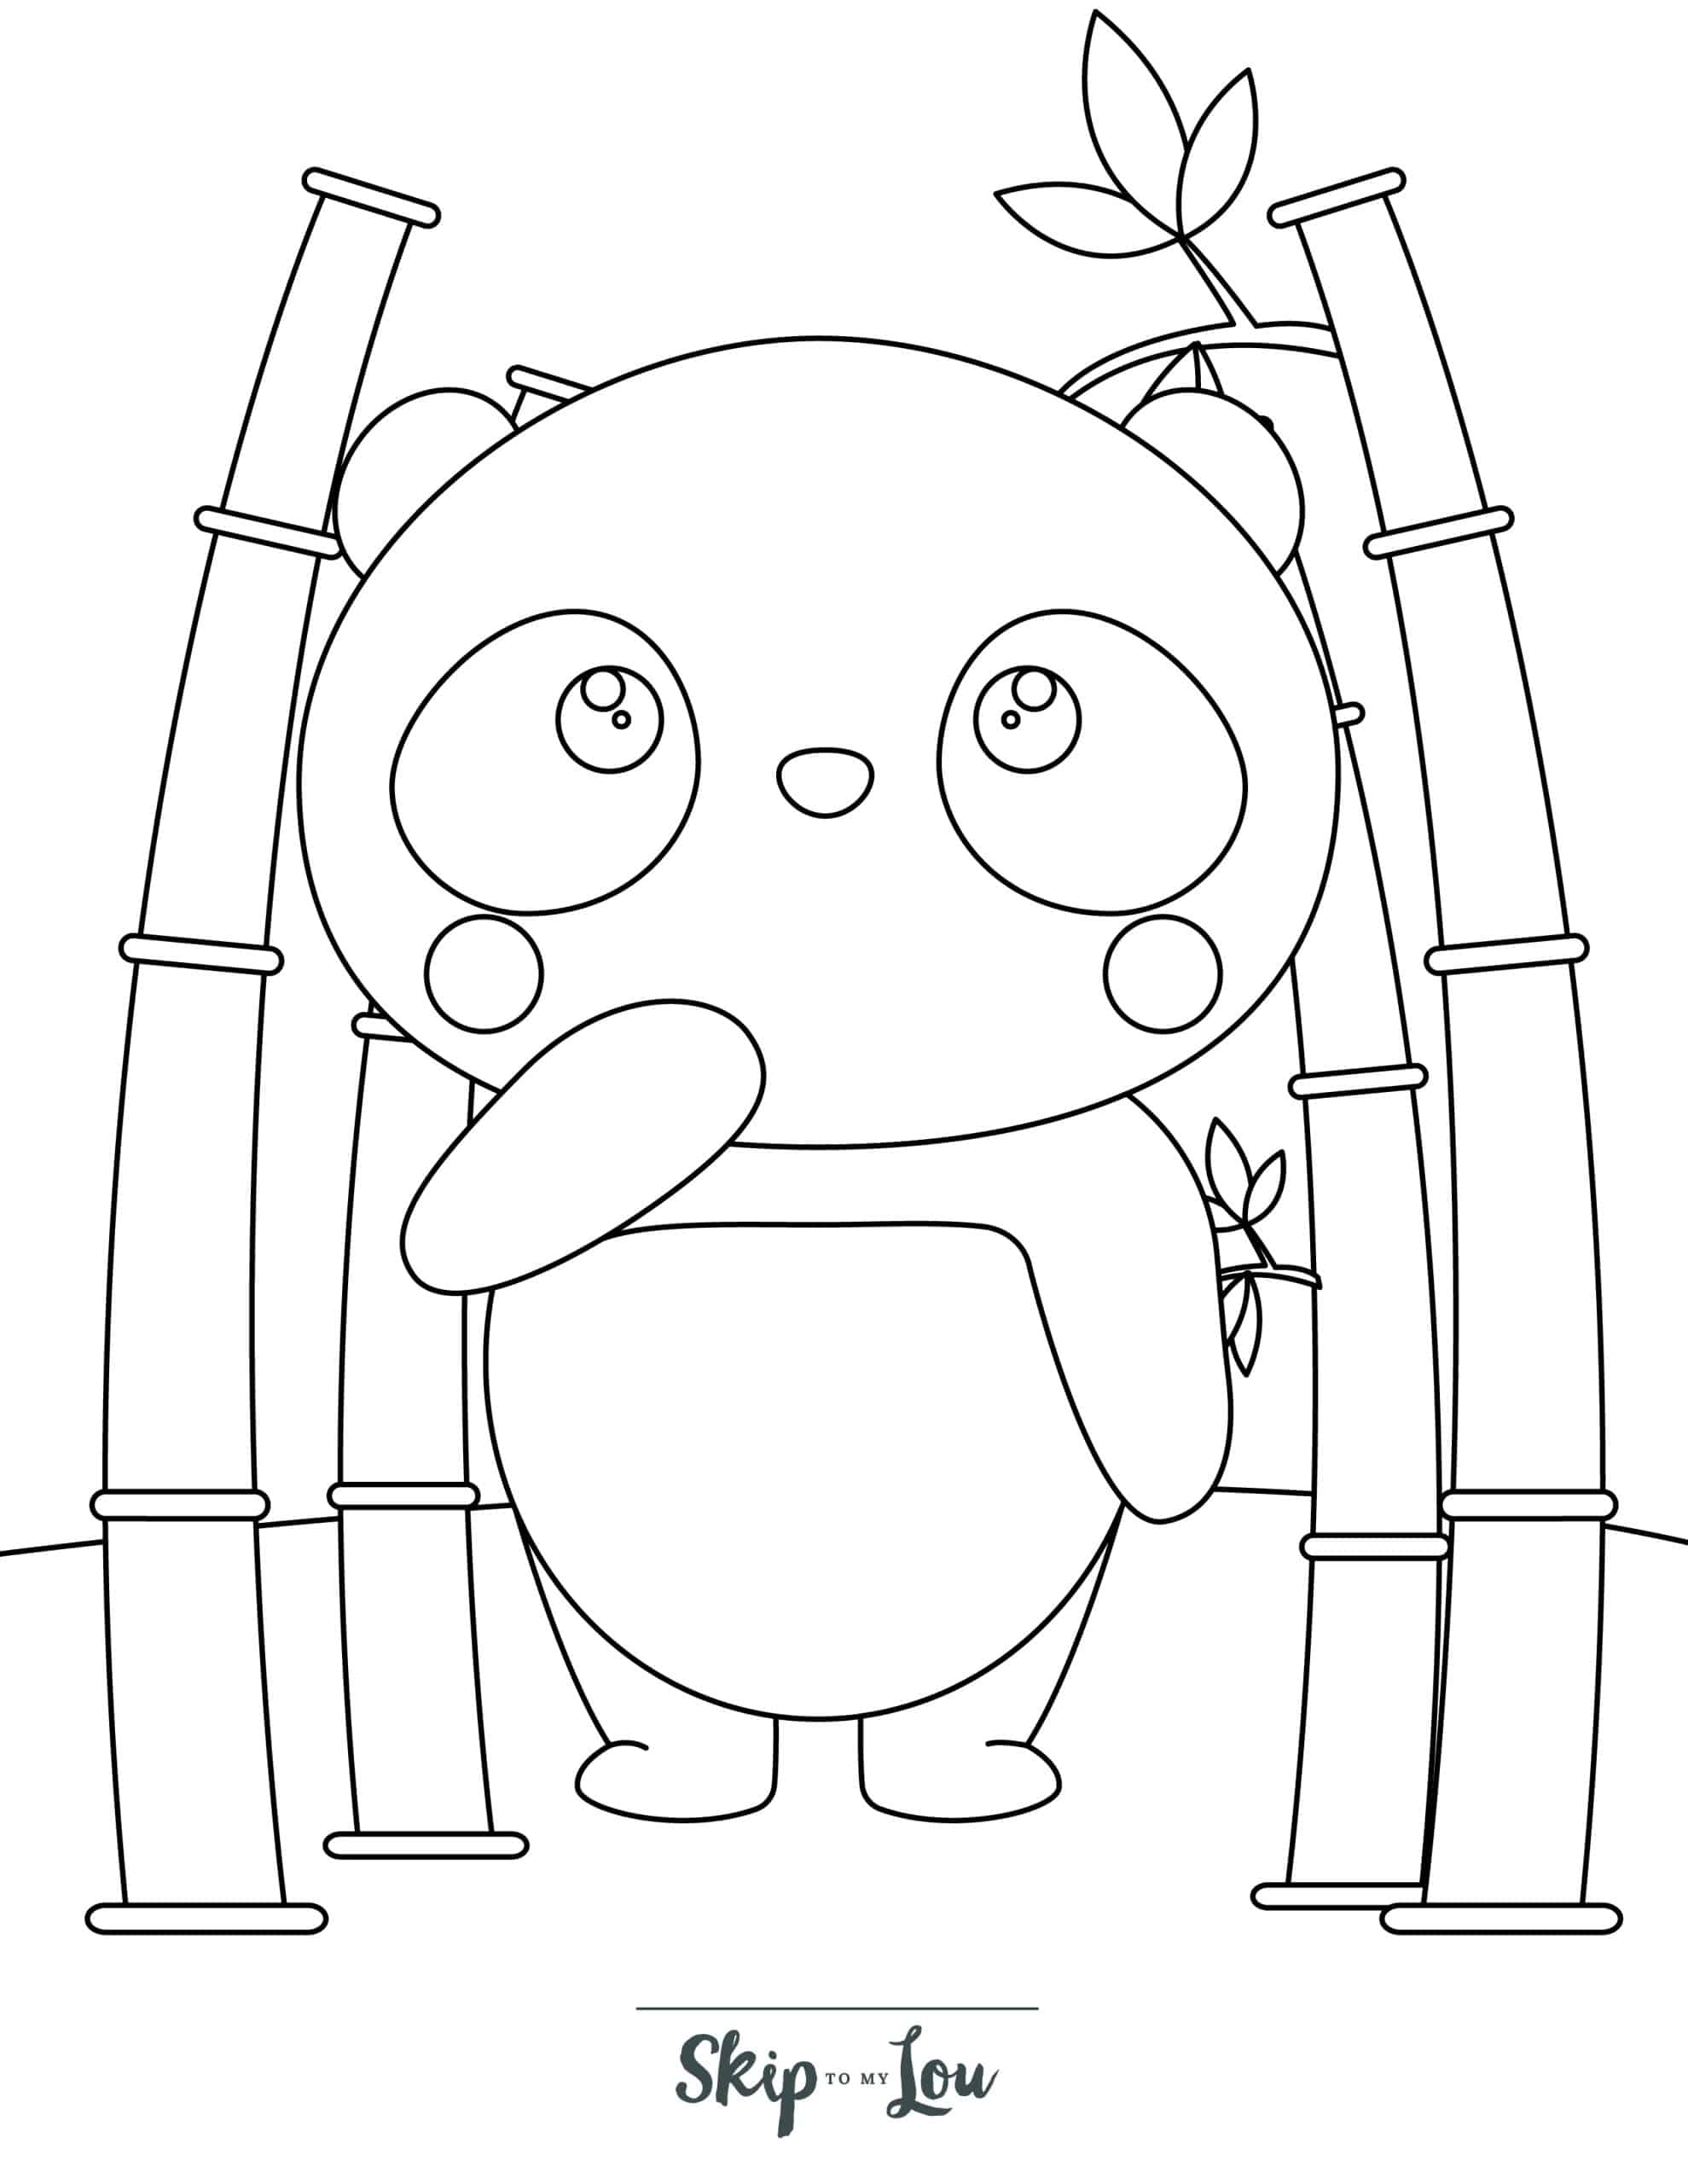 Free printable panda coloring pages for kids skip to my lou